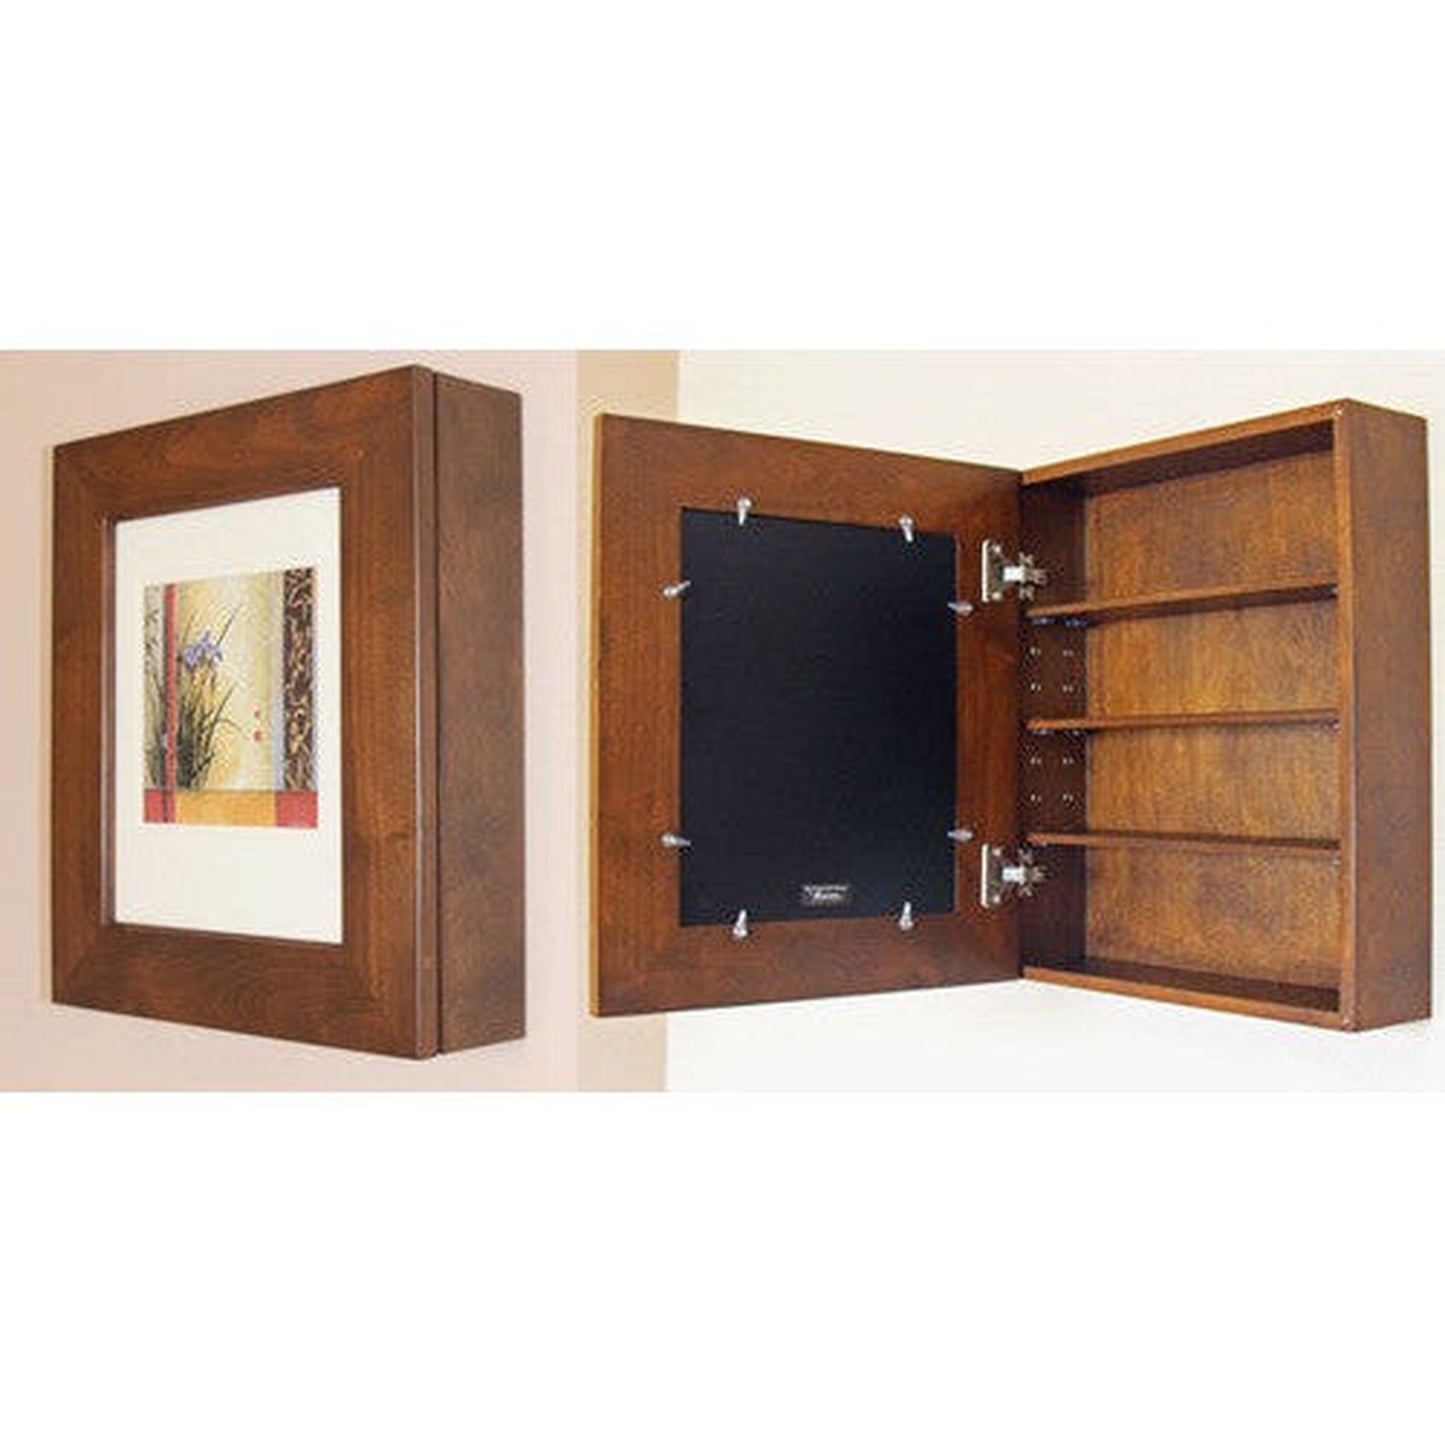 Fox Hollow Furnishings 20" x 17" Caramel Wall Mount Picture Frame Medicine Cabinet With White 8" x 10" Matting